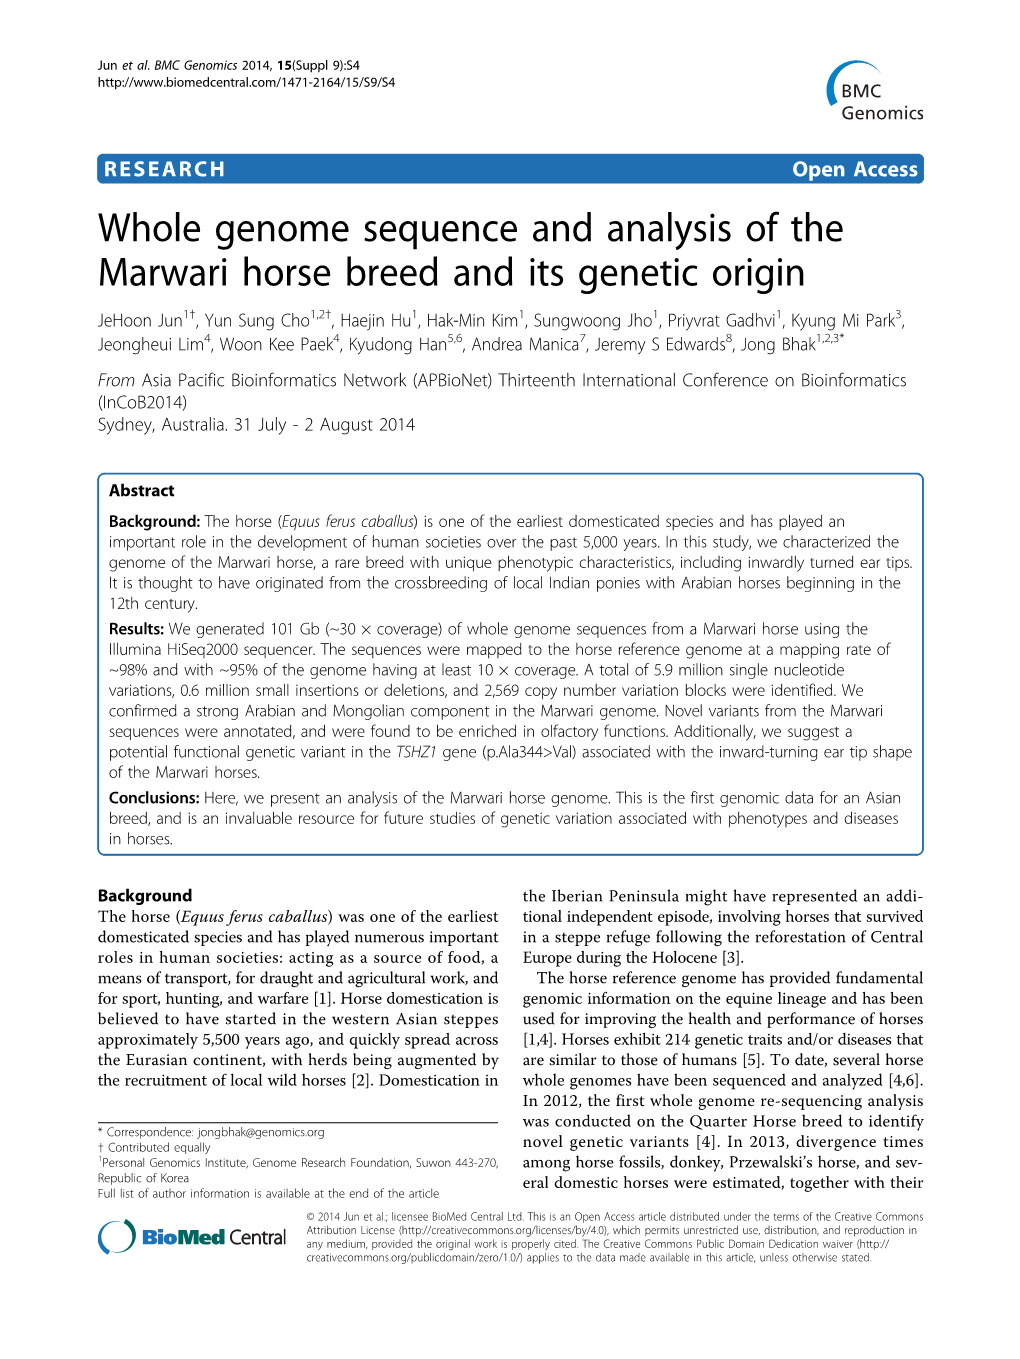 Whole Genome Sequence and Analysis of the Marwari Horse Breed